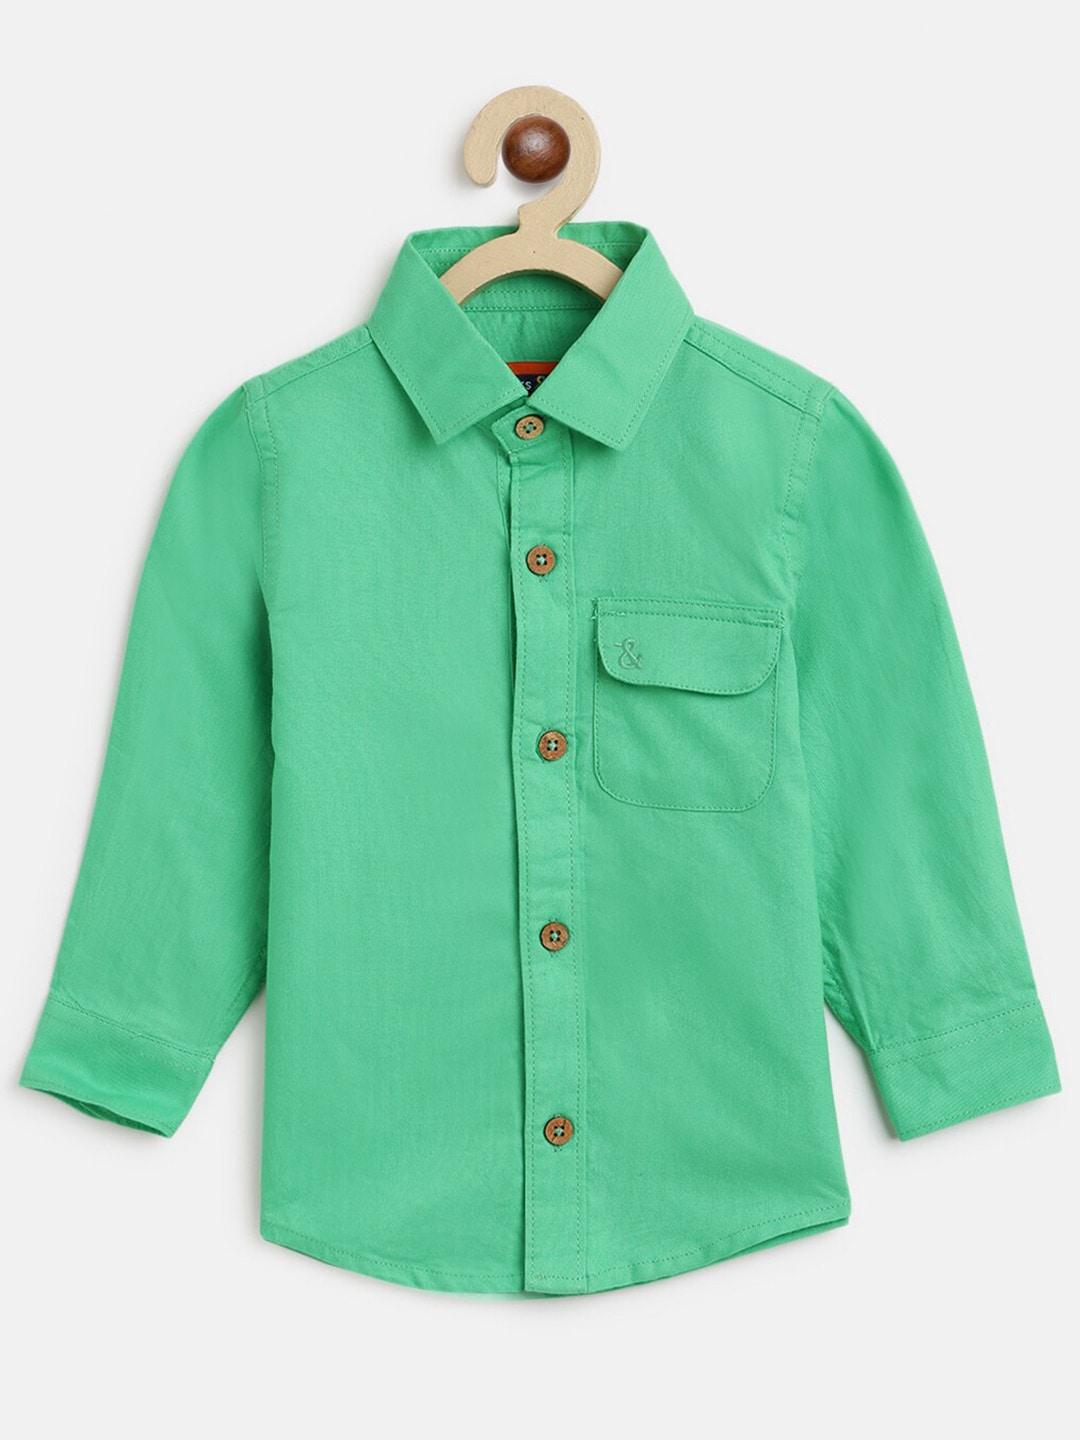 tales & stories boys green cotton casual shirt